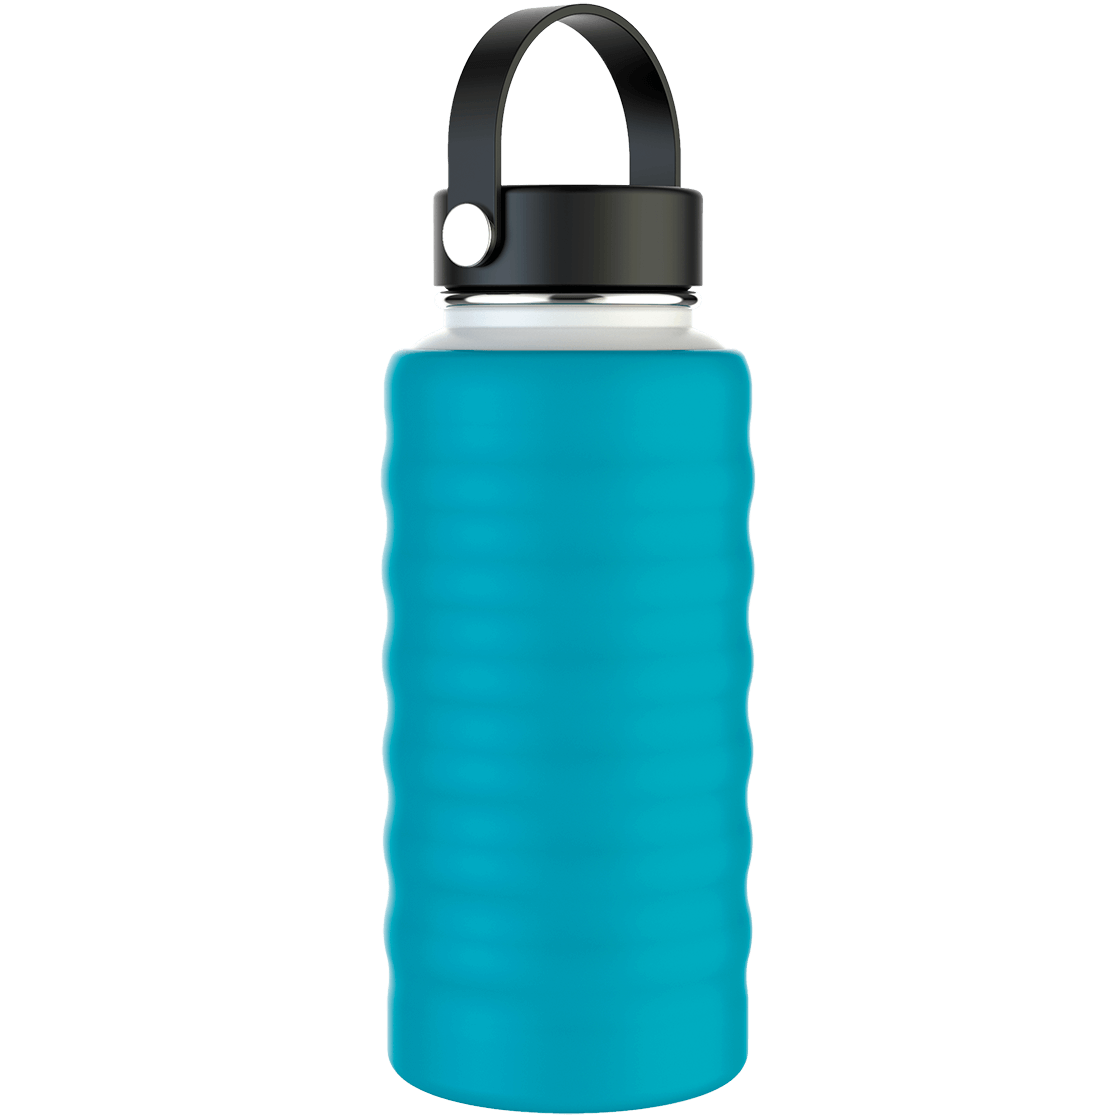 Blue Hydro Flask PNG High-Quality Image